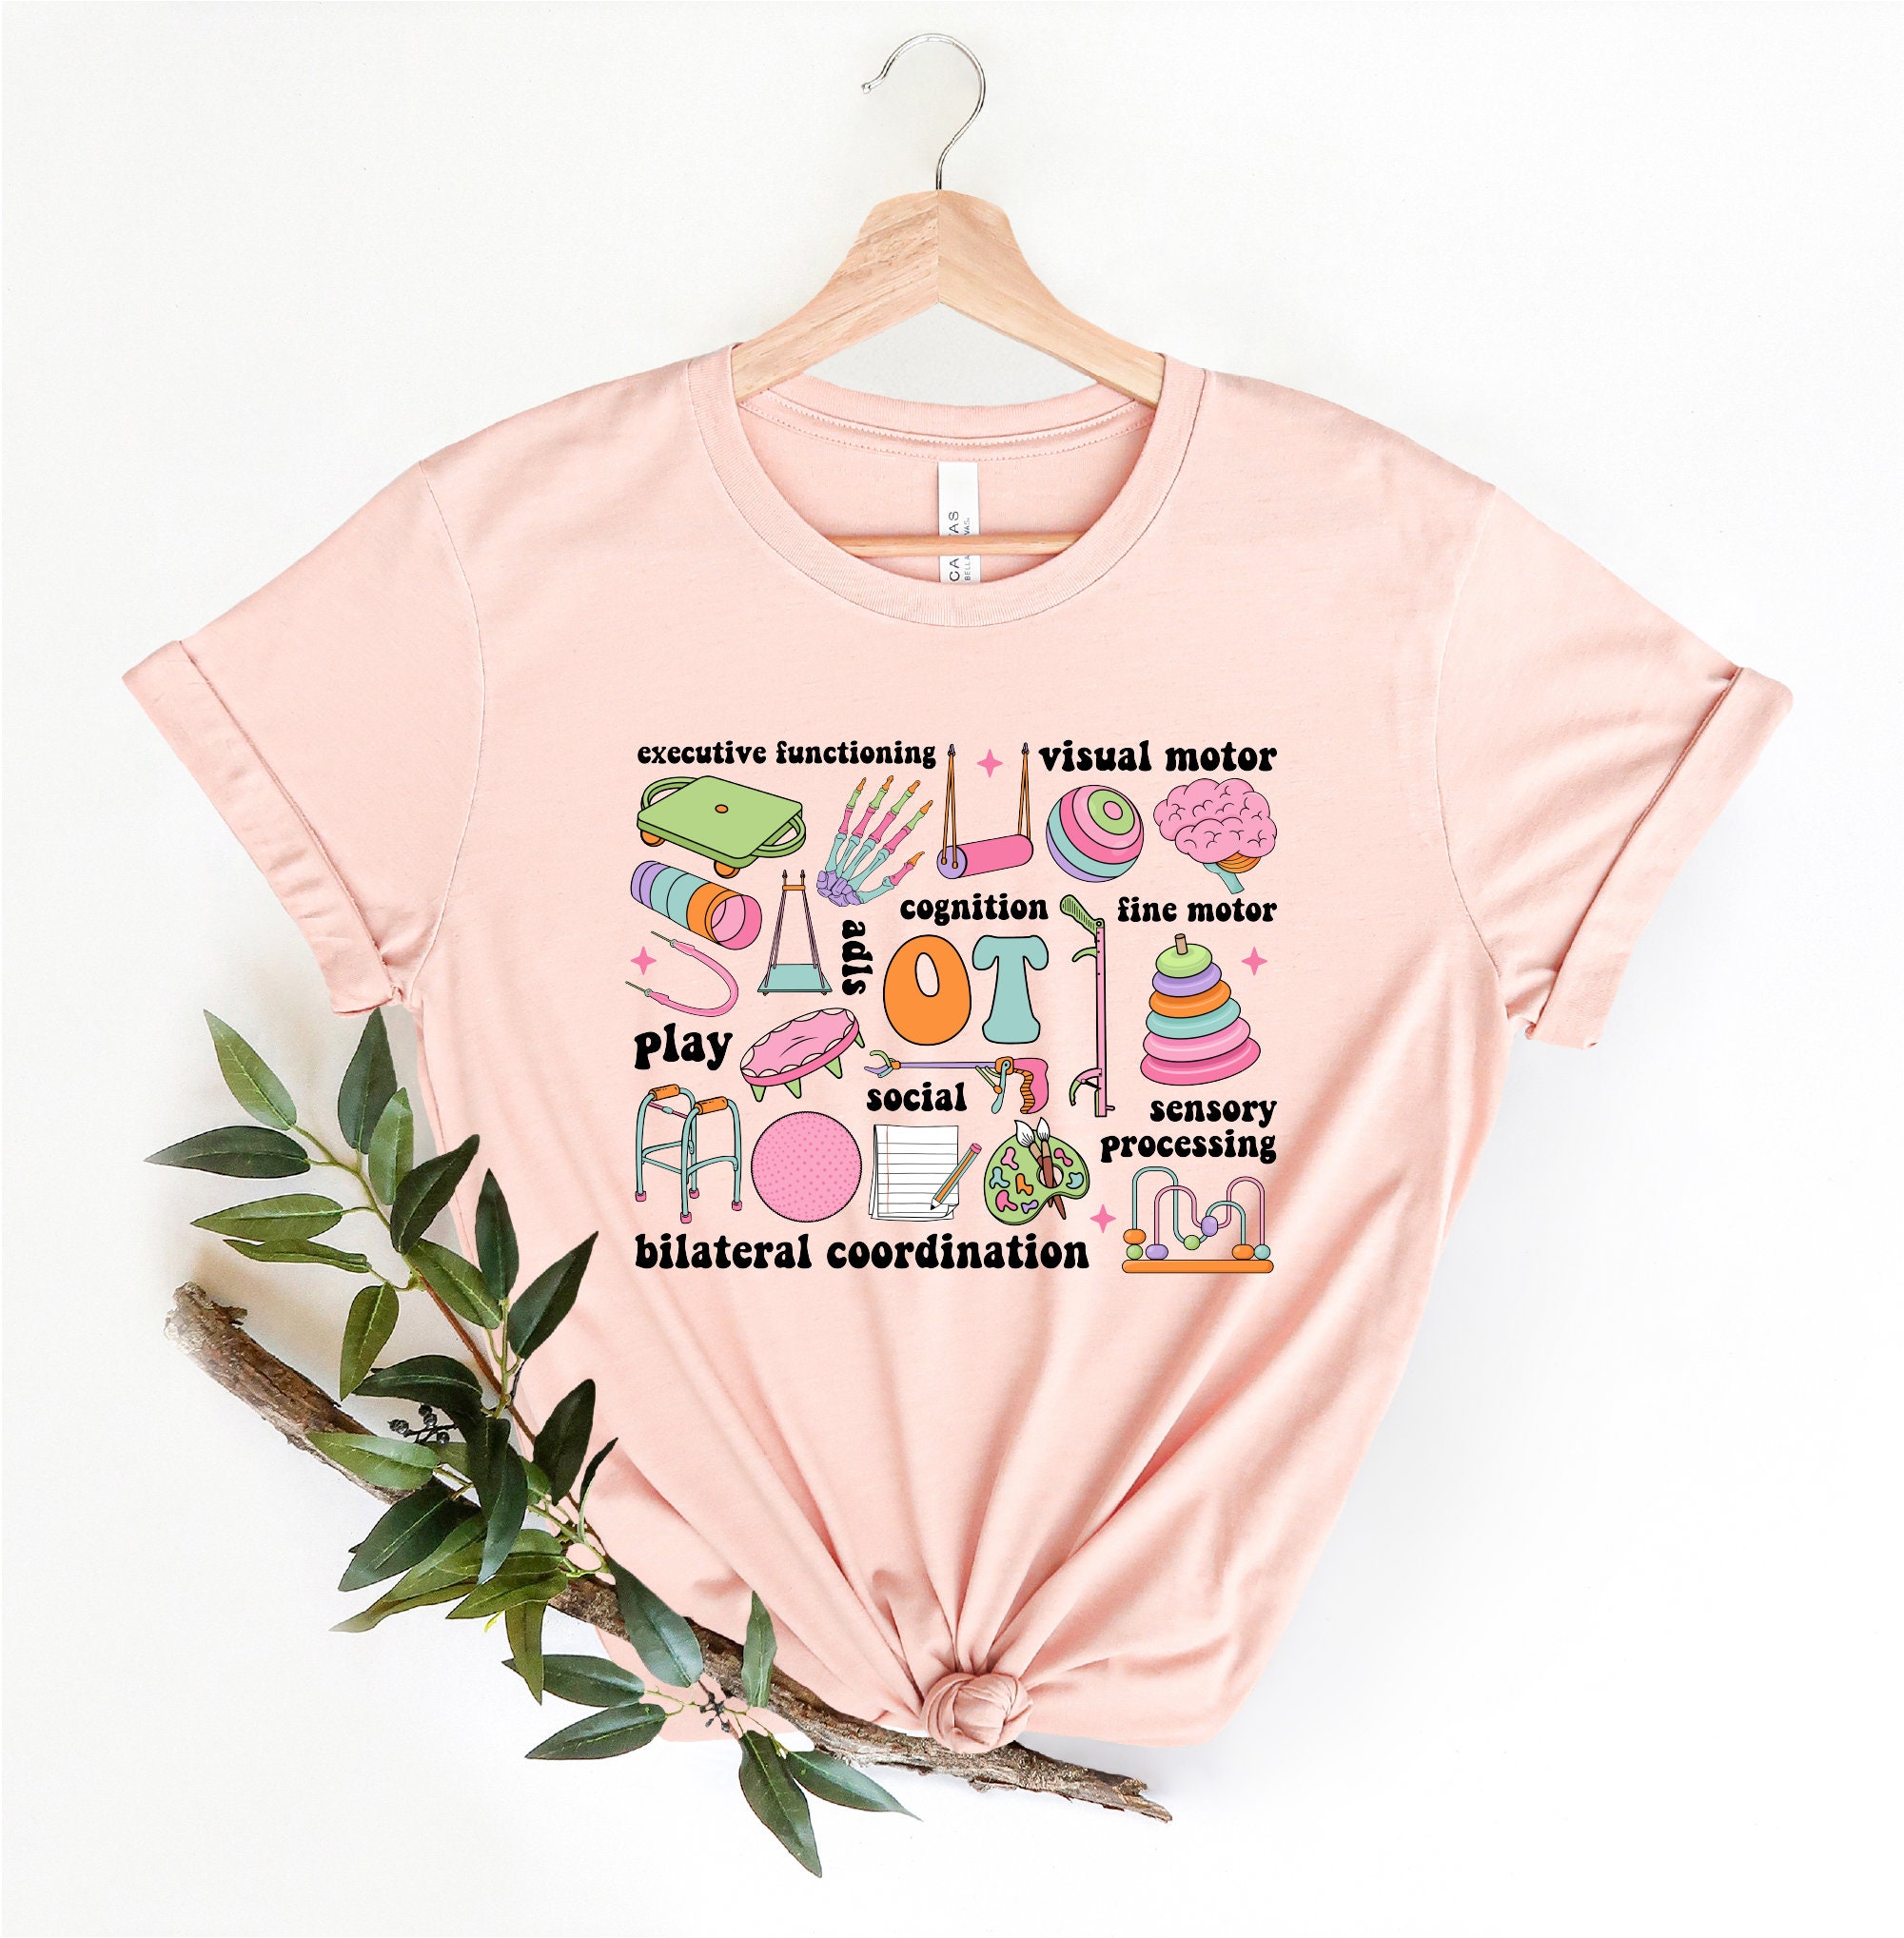 Discover Occupational Therapy Shirt, Occupational Therapist Shirt, OT Shirt, Special Education Shirt, Therapist Shirt, OT Assistant Shirt, OT Tee